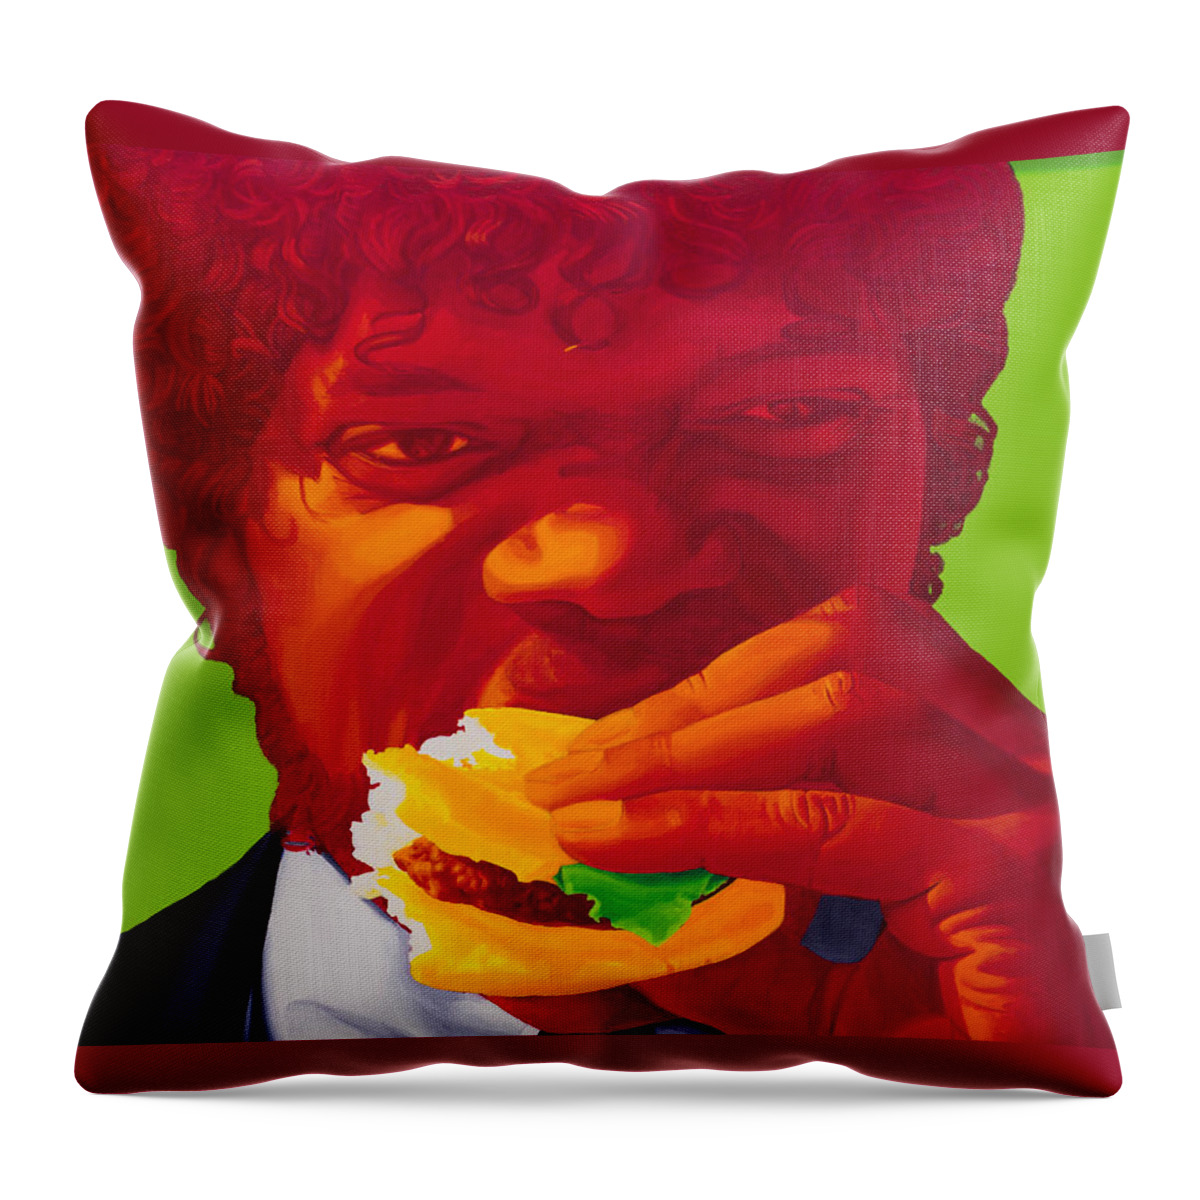 Pulp Fiction Throw Pillow featuring the painting Tasty Burger by Ellen Patton